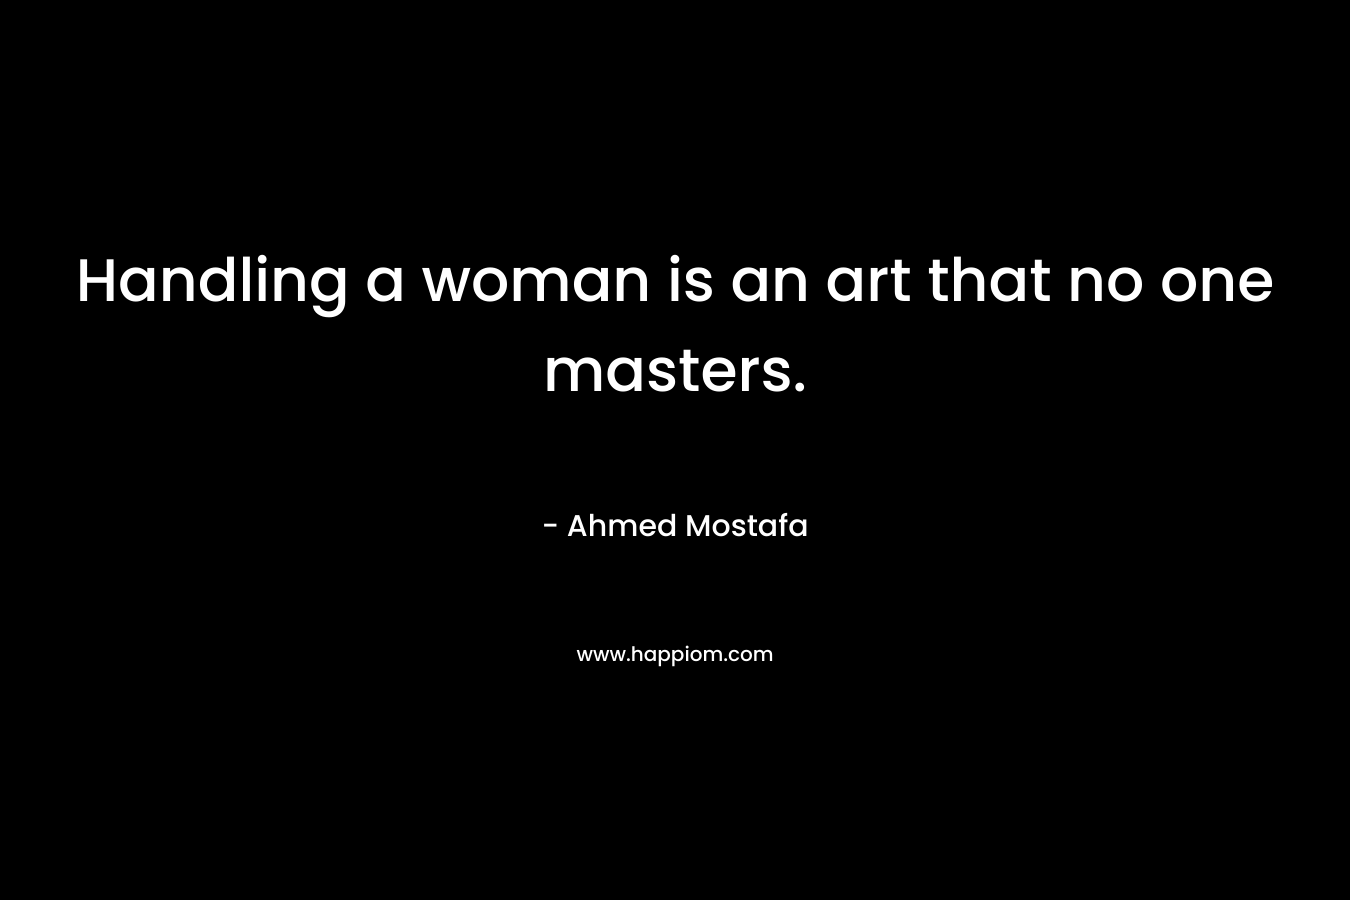 Handling a woman is an art that no one masters.